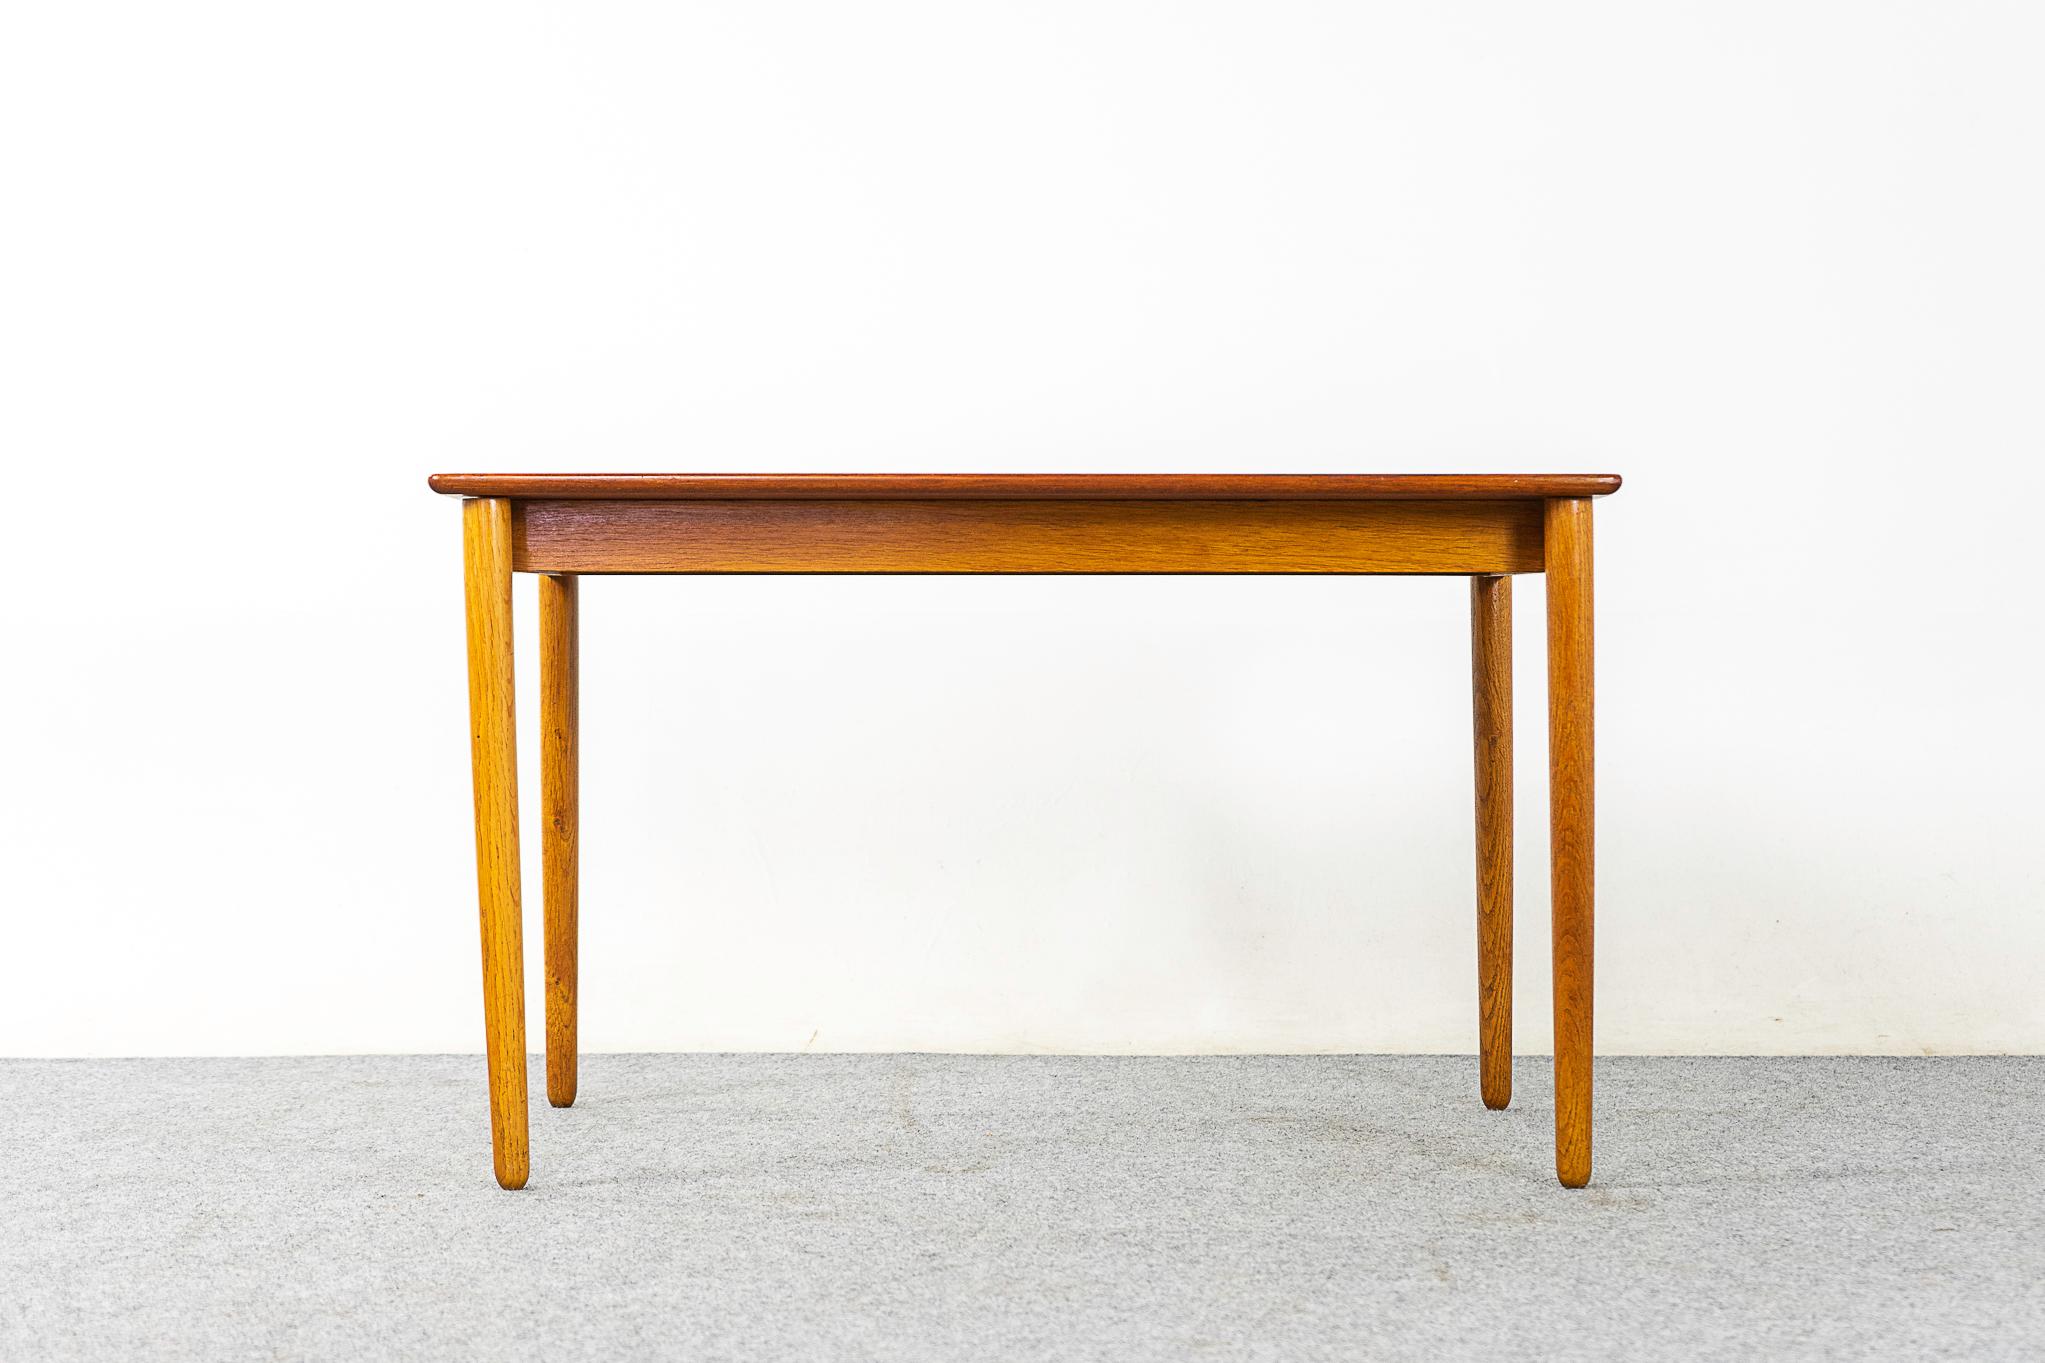 Teak & oak Danish coffee table, circa 1960. Solid teak top with contrasting oak base. Very unusual dimensions!

Please inquire for remote and international shipping rates.